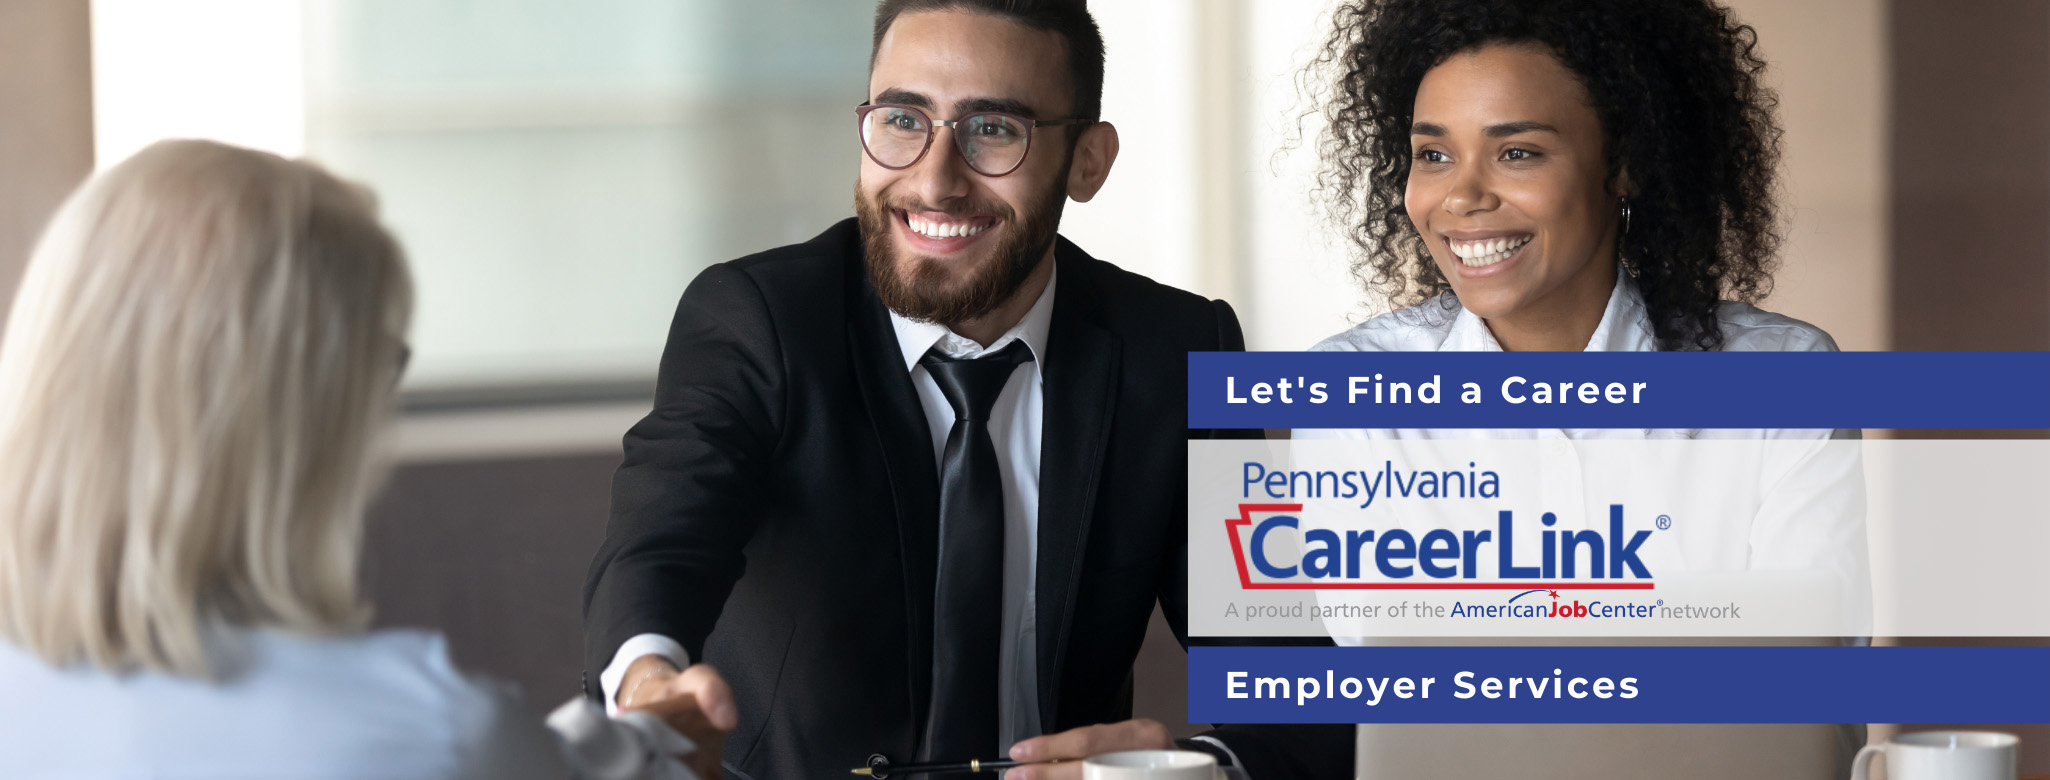 PA Career Link Employer Services